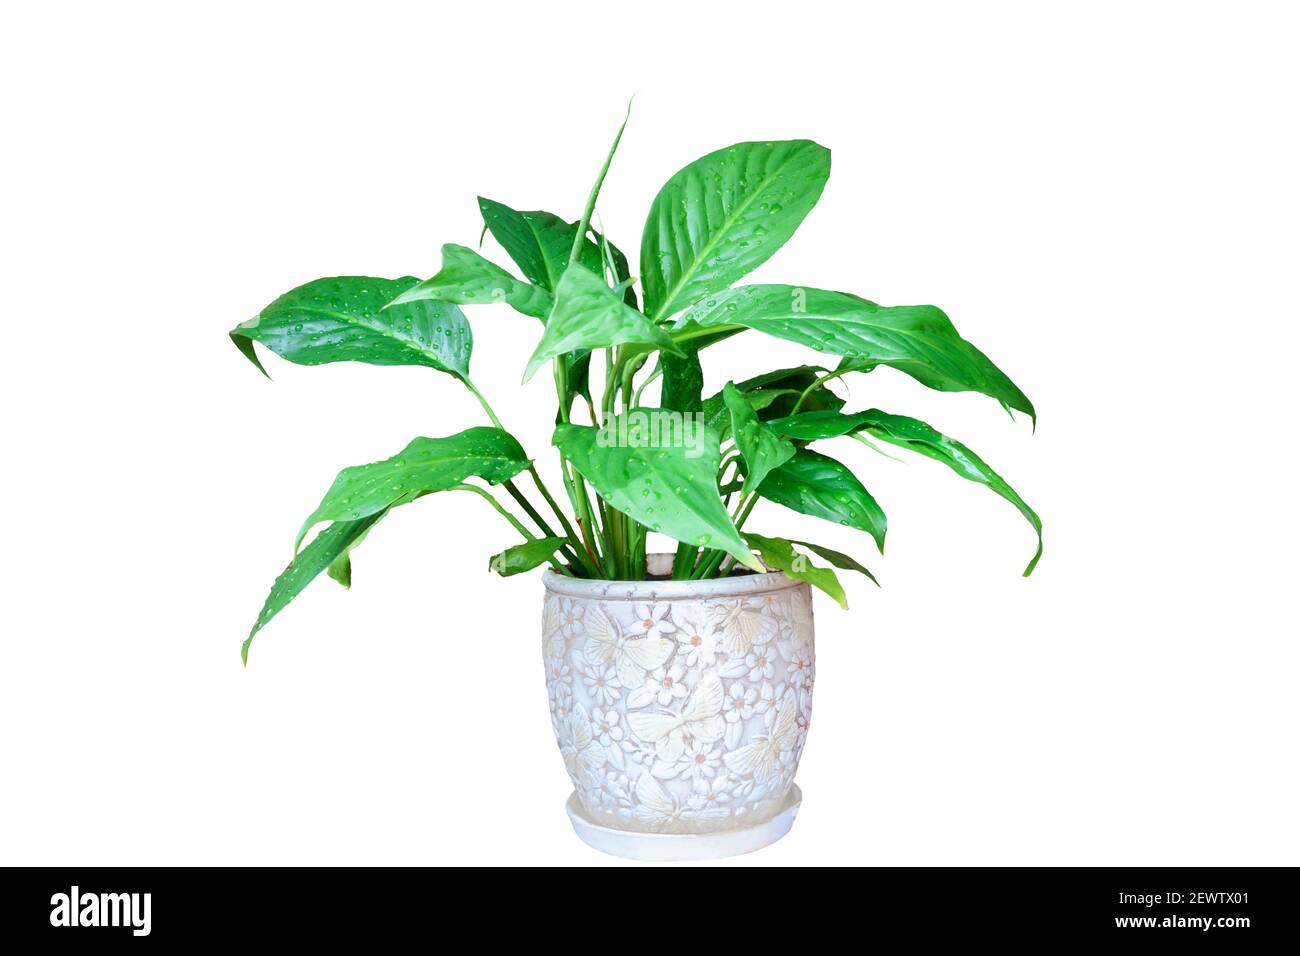 indoor flower Spathiphyllum in ceramic pot isolated on white background Stock Photo